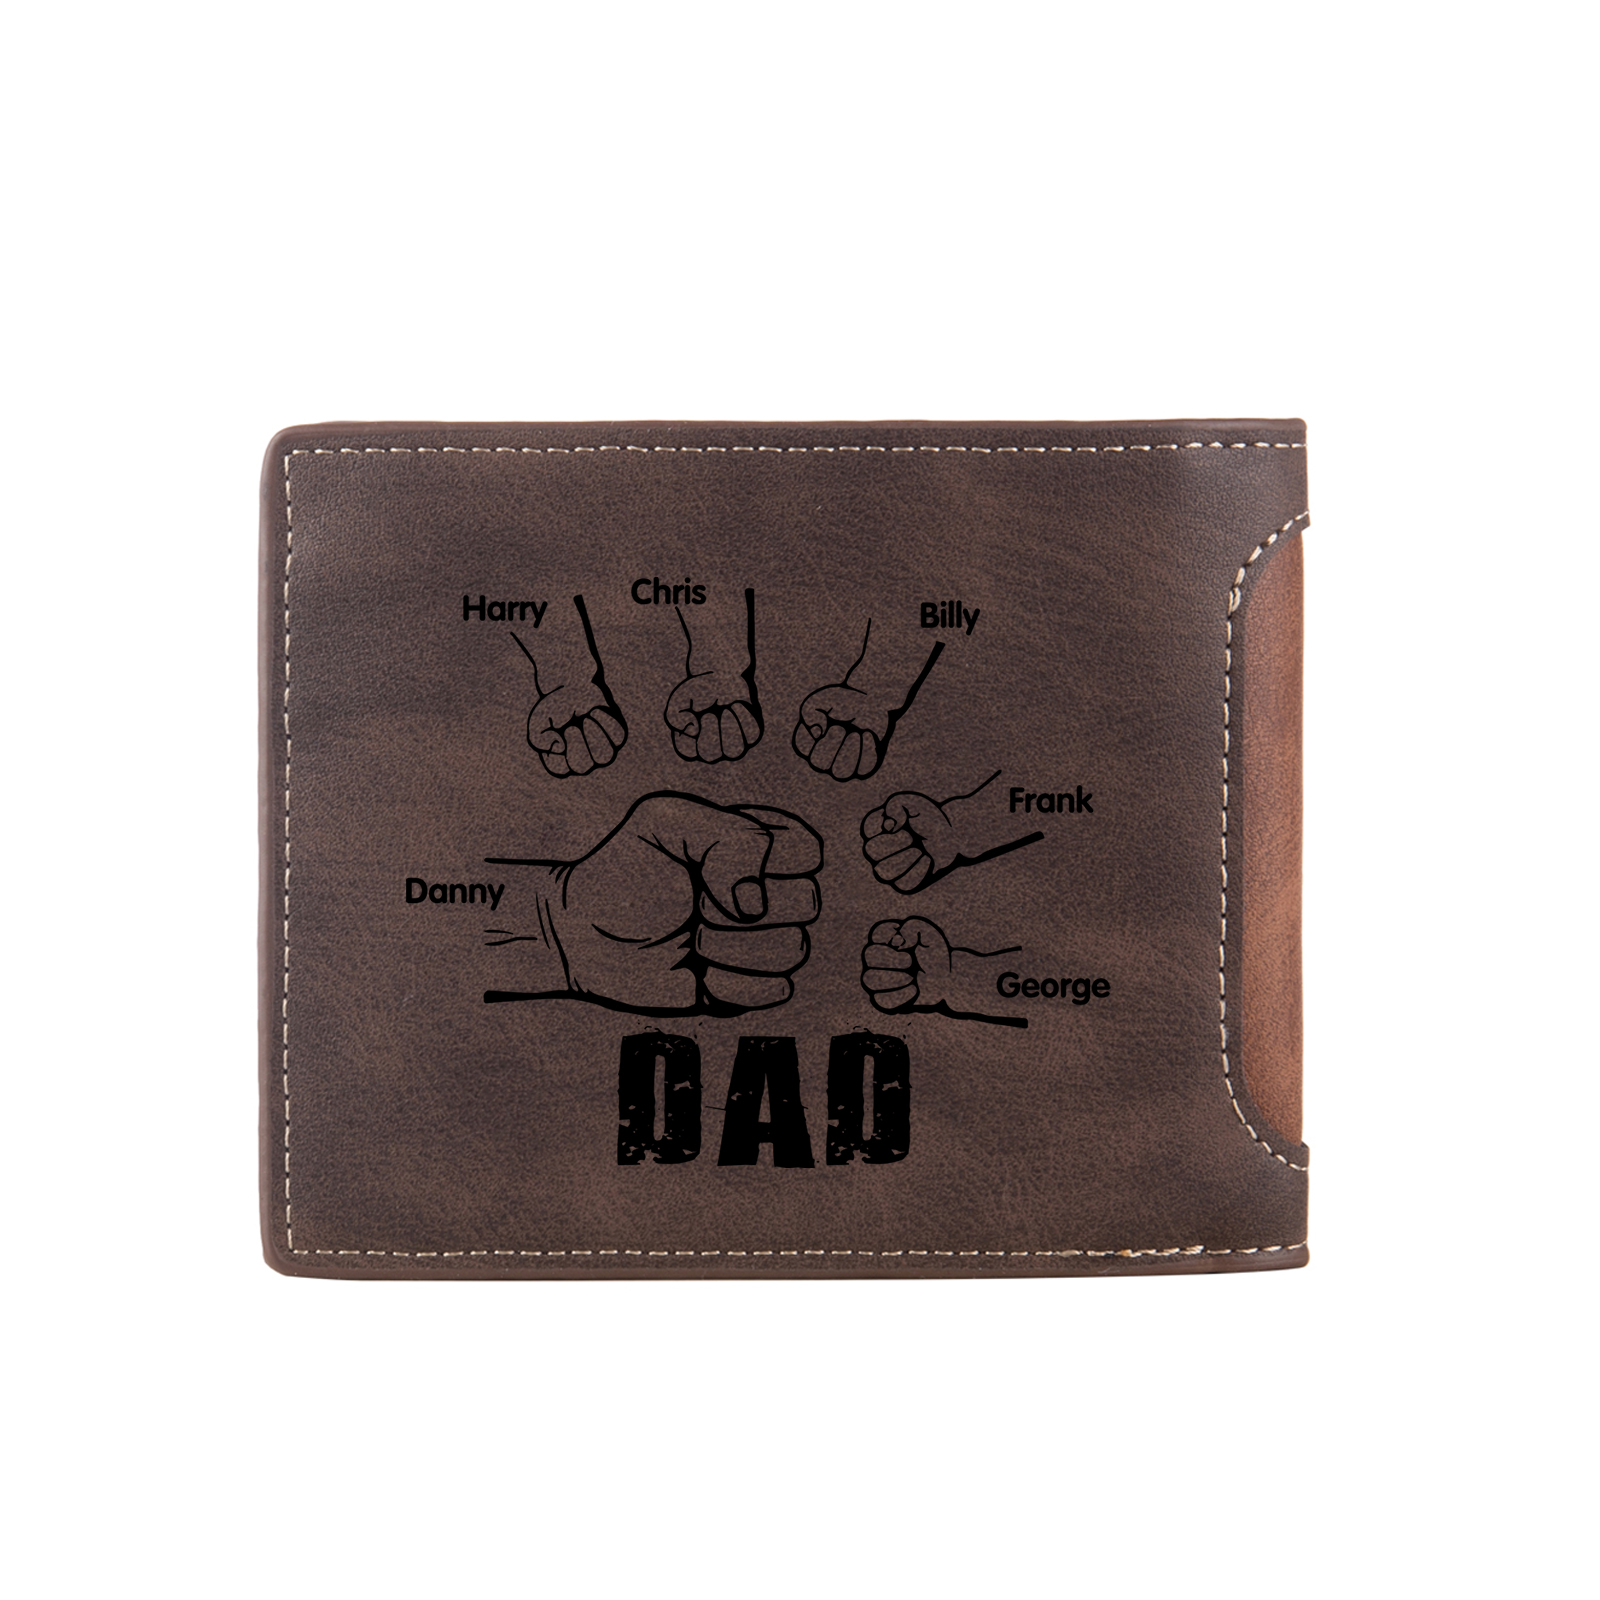 6 Names - Personalized Photo Custom Leather Men's Folding Wallet as a Father's Day Gift for Dad